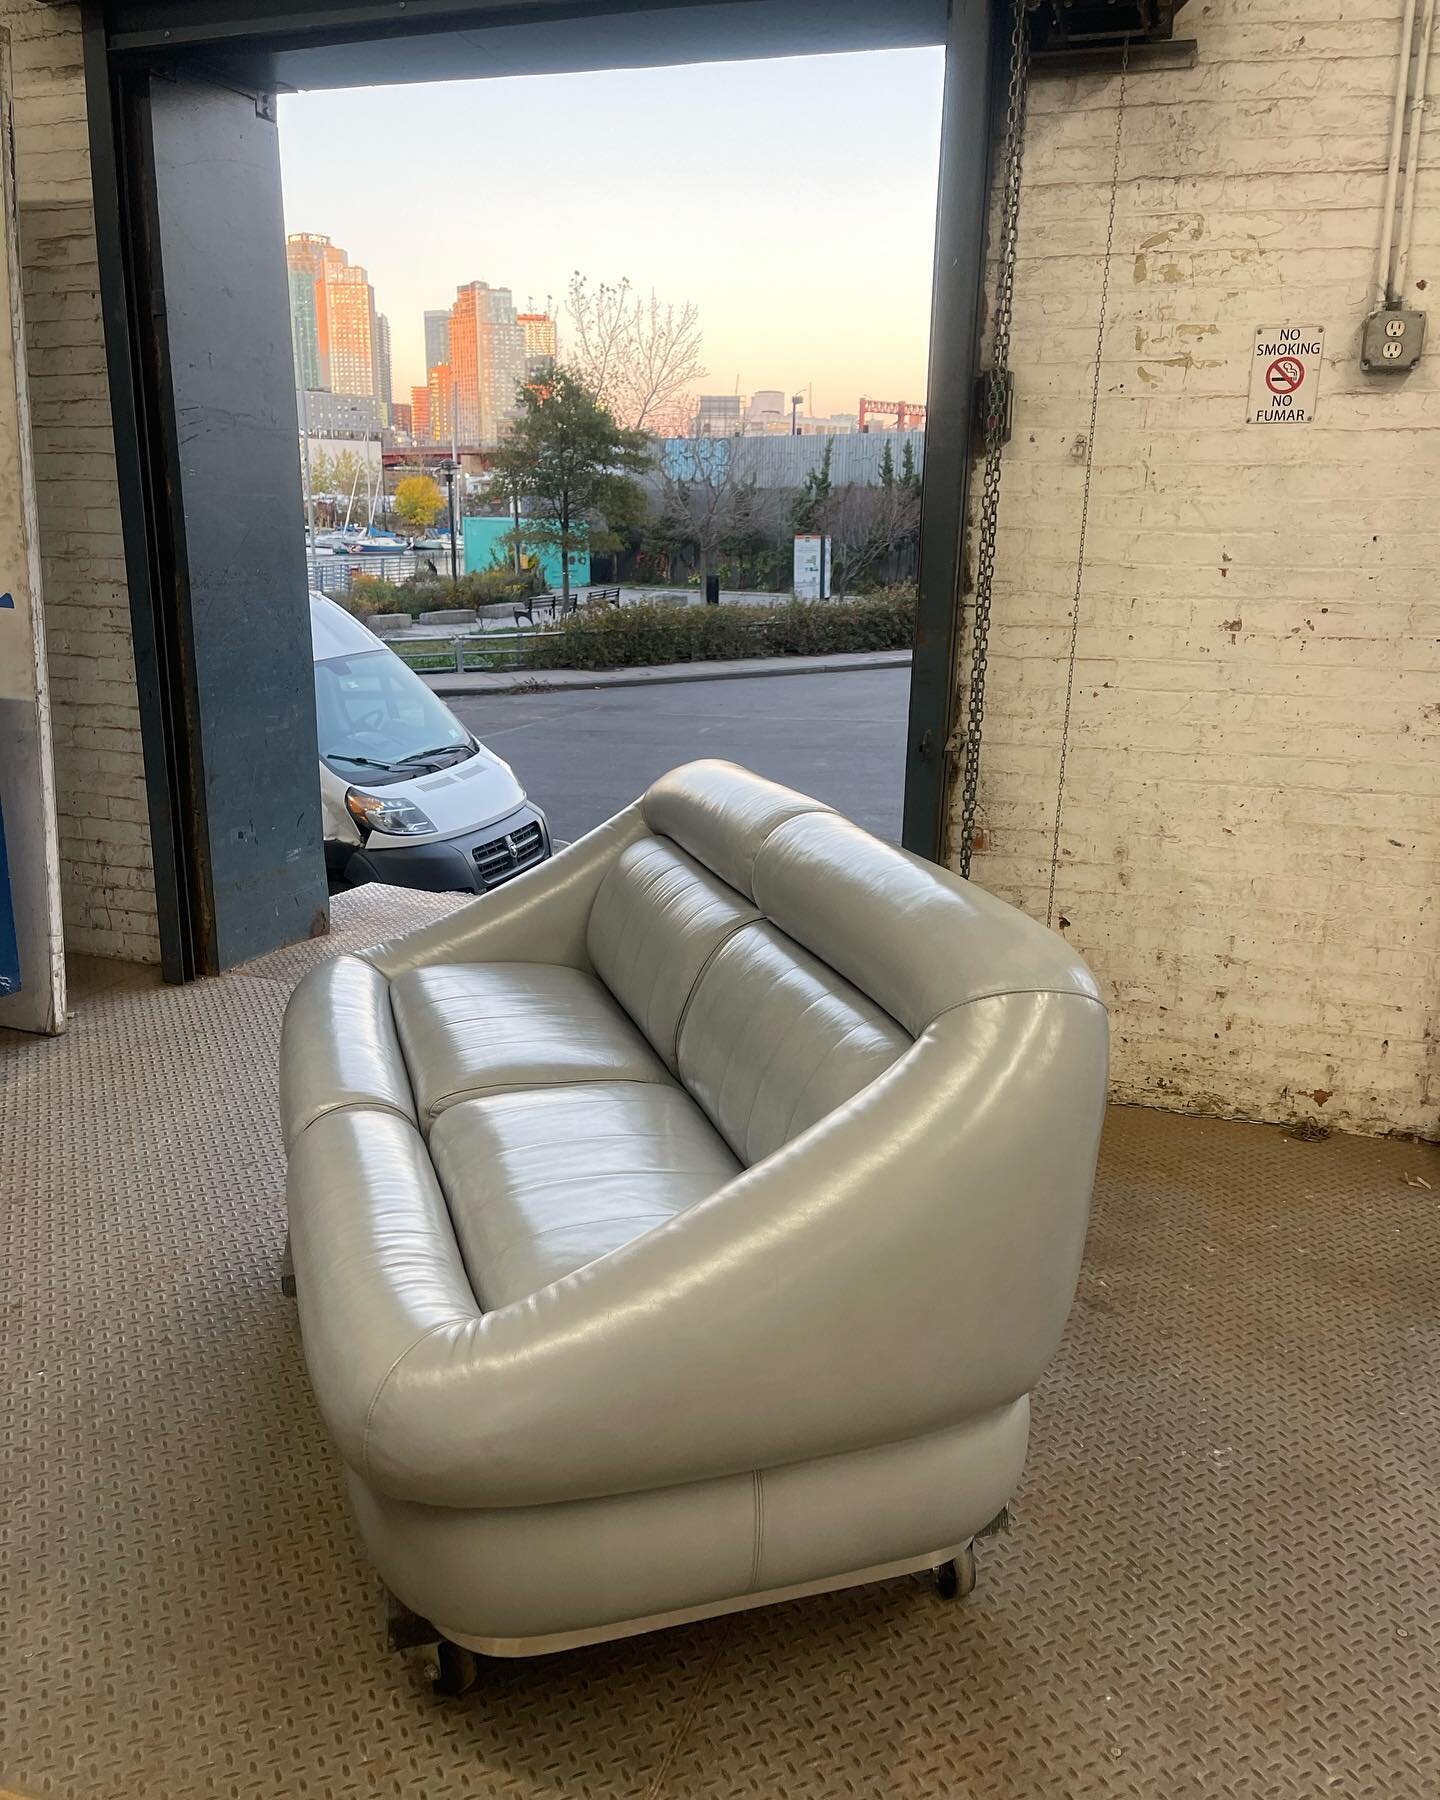 A Dassi arredamenti settee from Italy in its original upholstery beautifully preserved by @mhgstudioinc . For over 20 years they&rsquo;ve restored all my leather goods and never cease to amaze me.  #nyc #interiordesign #brooklyn #design #italiandesig